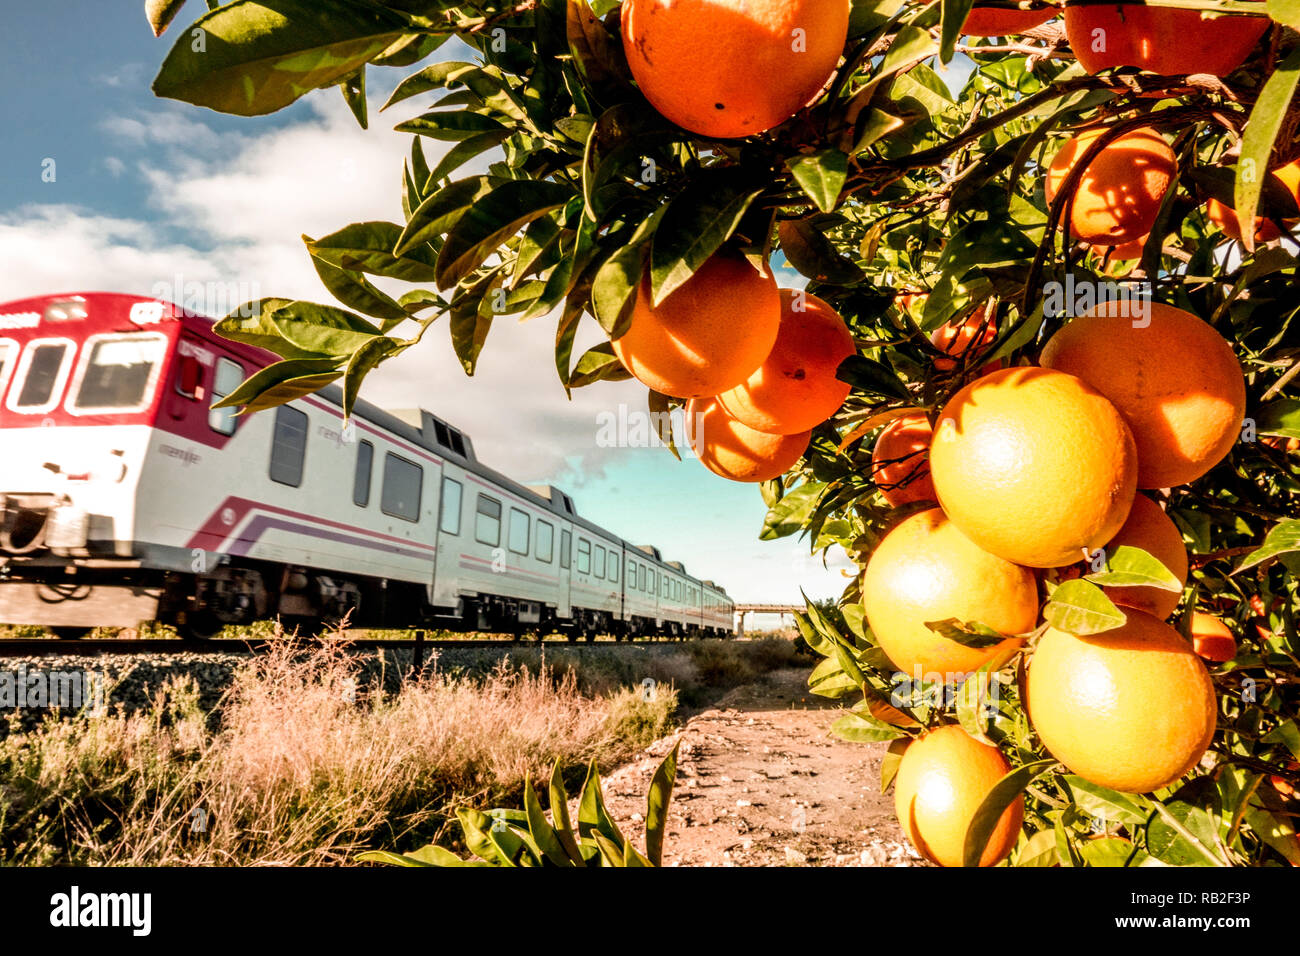 Orchard of ripening oranges on sunshine and train, Valencia Spain agriculture Stock Photo